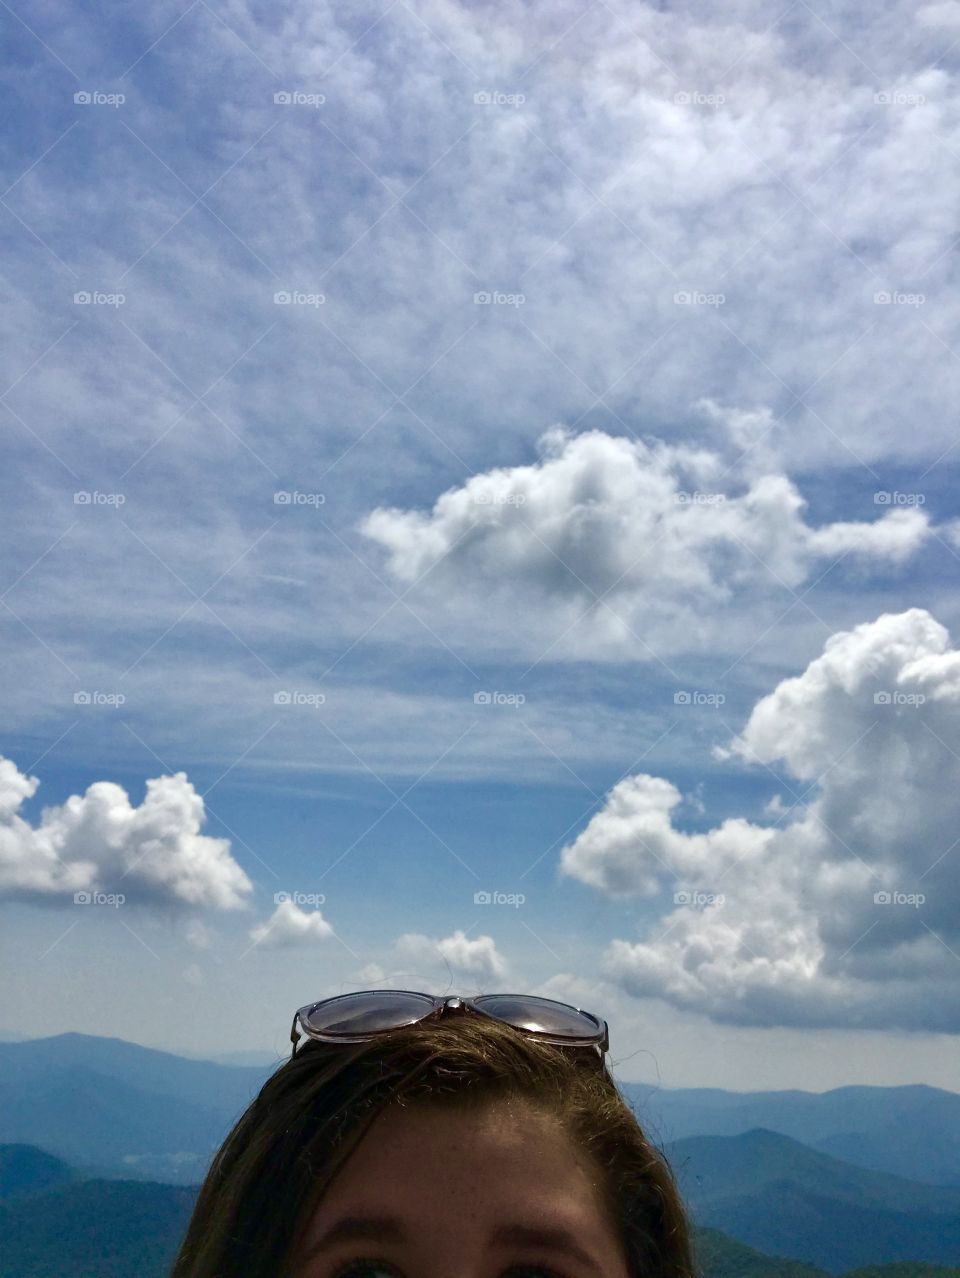 Blue skies, puffy white clouds and smoky mountain tops at 4784 feet in Georgia, USA